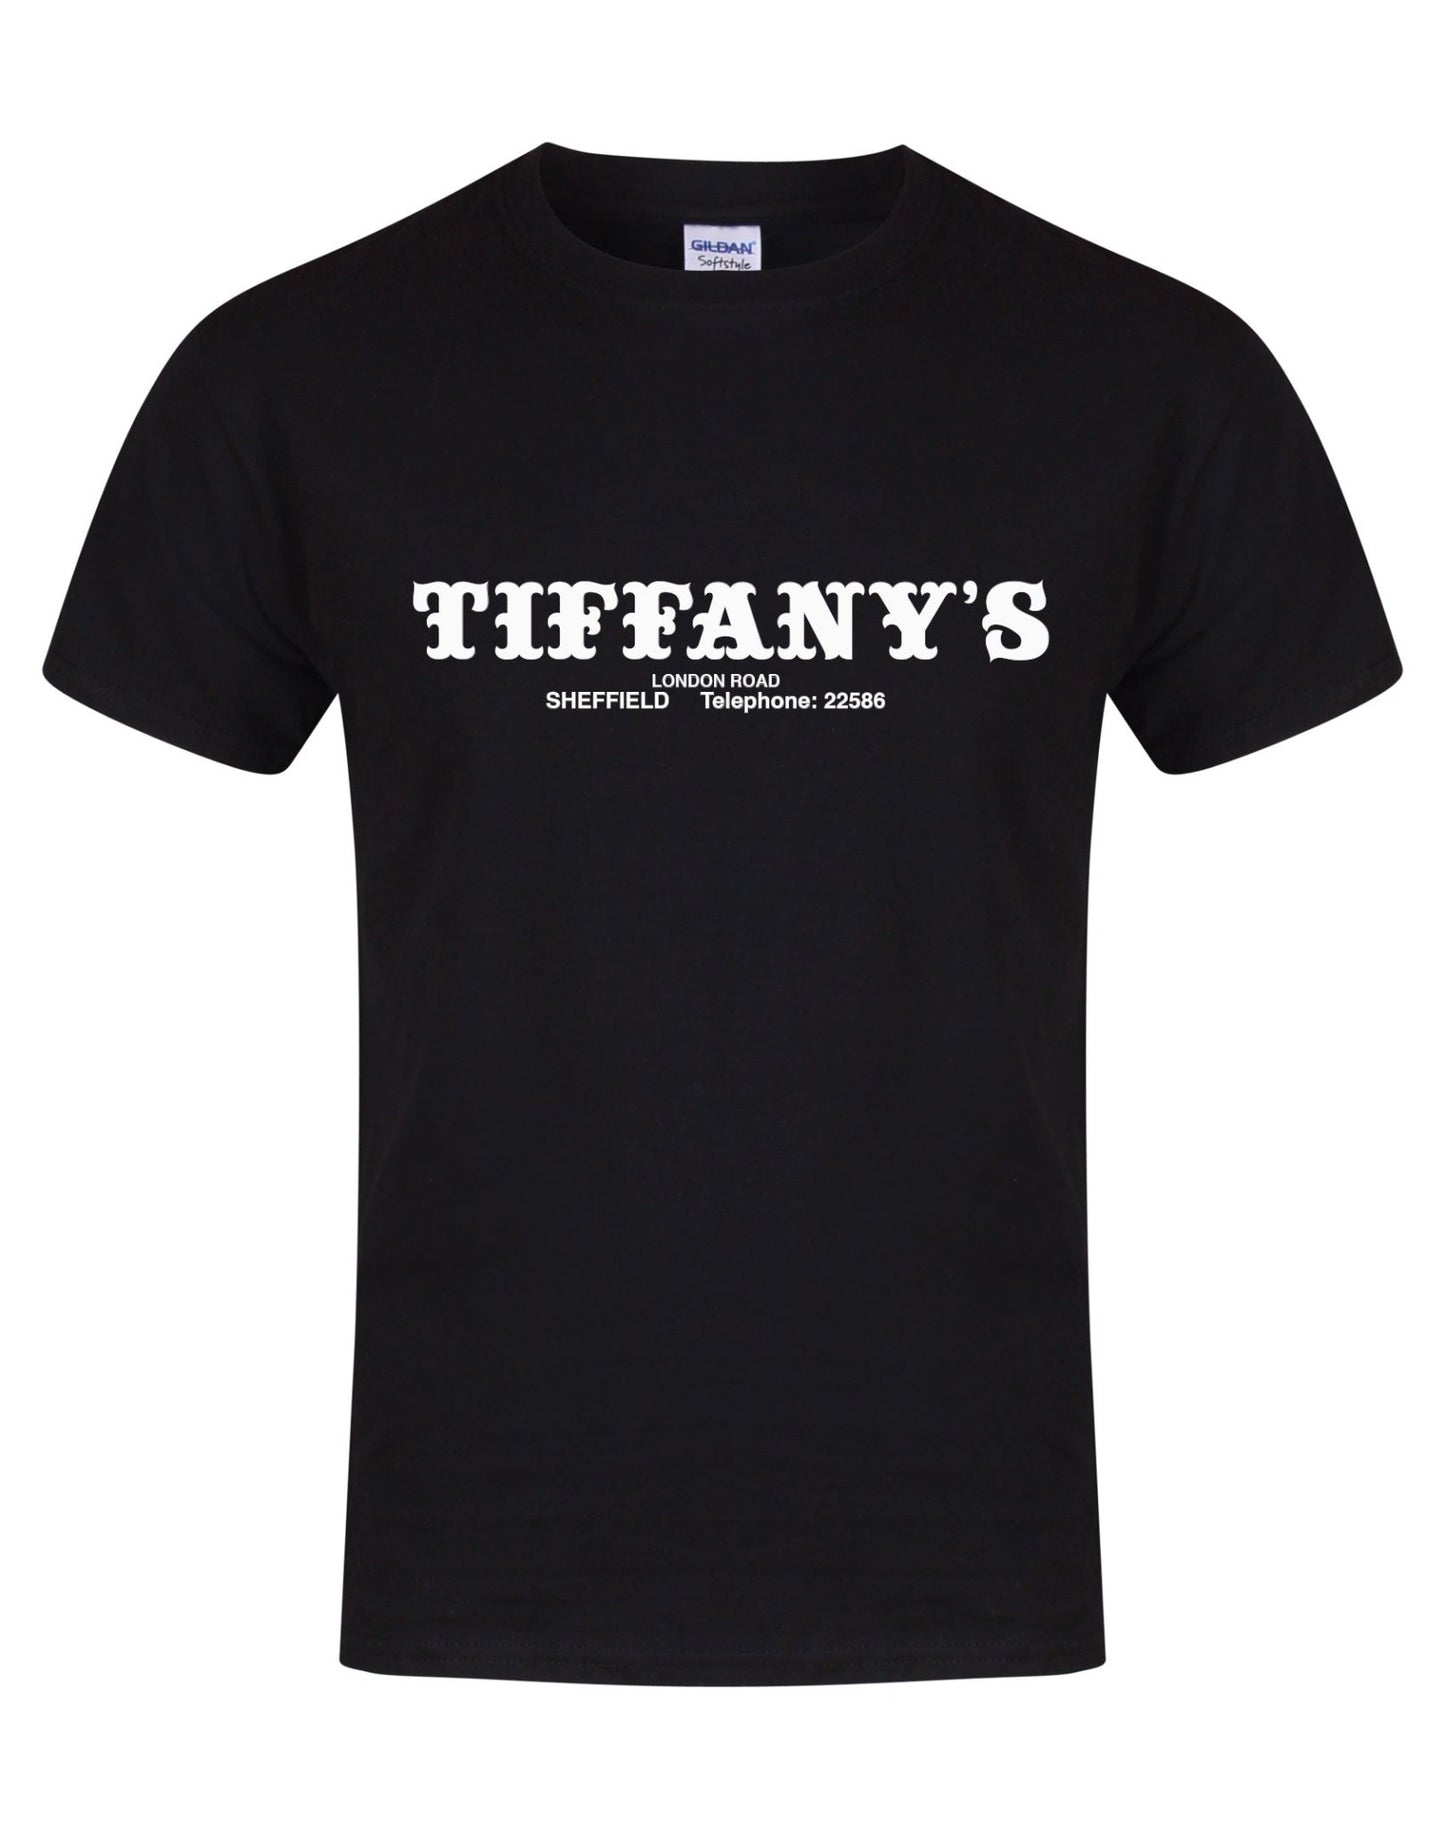 Tiffany's Sheffield unisex fit T-shirt - various colours - Dirty Stop Outs